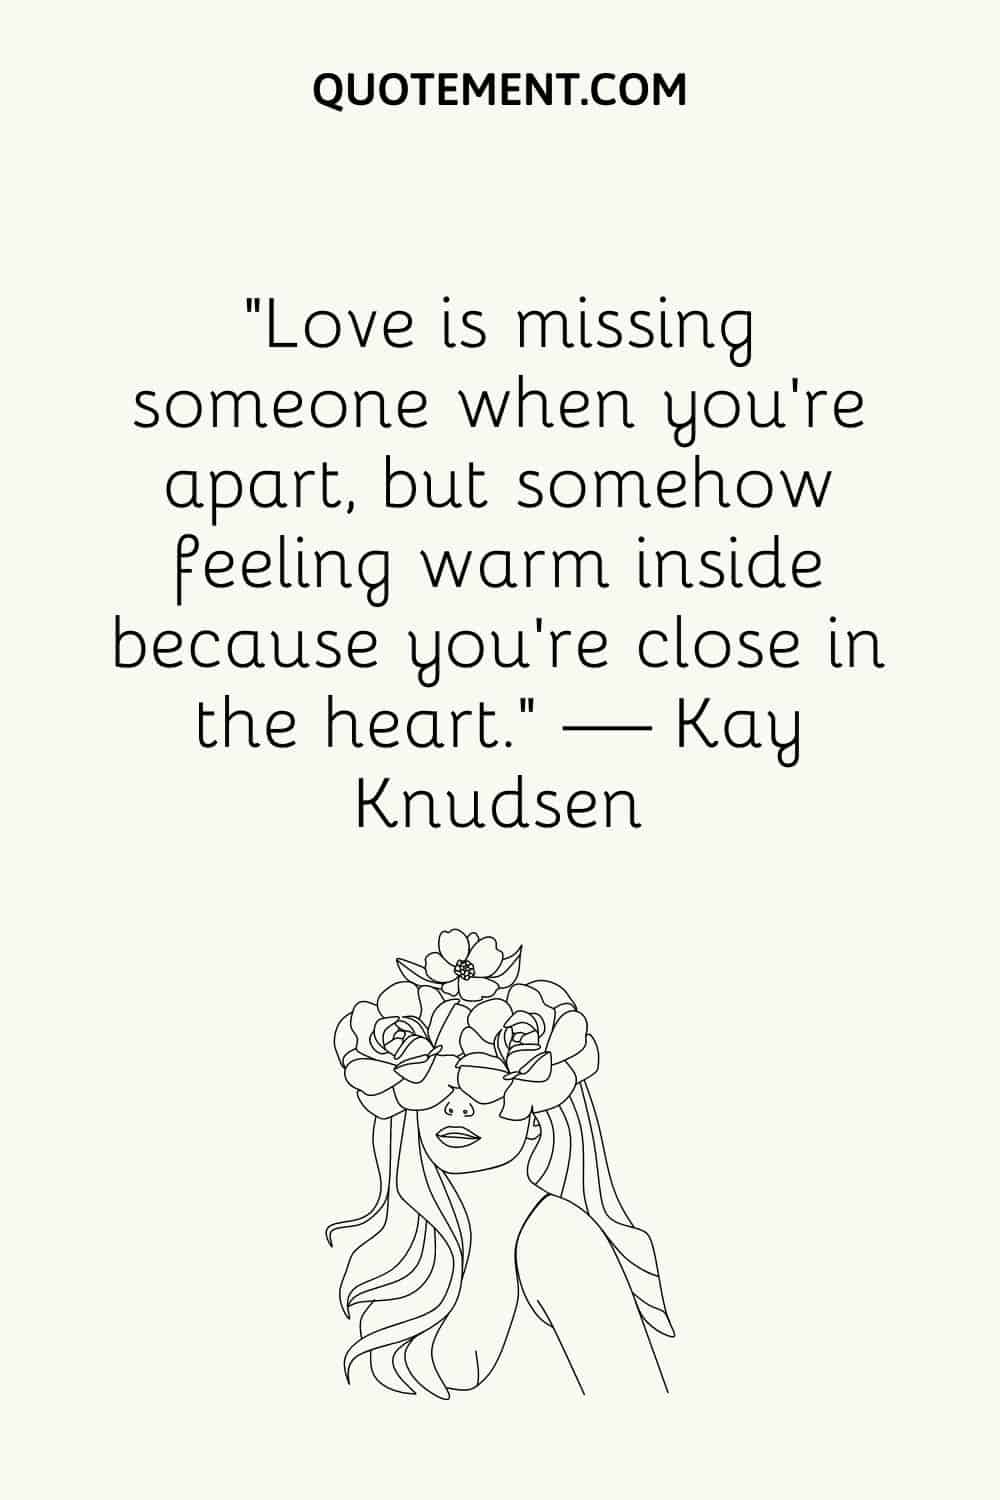 “Love is missing someone when you’re apart, but somehow feeling warm inside because you’re close in the heart.” — Kay Knudsen